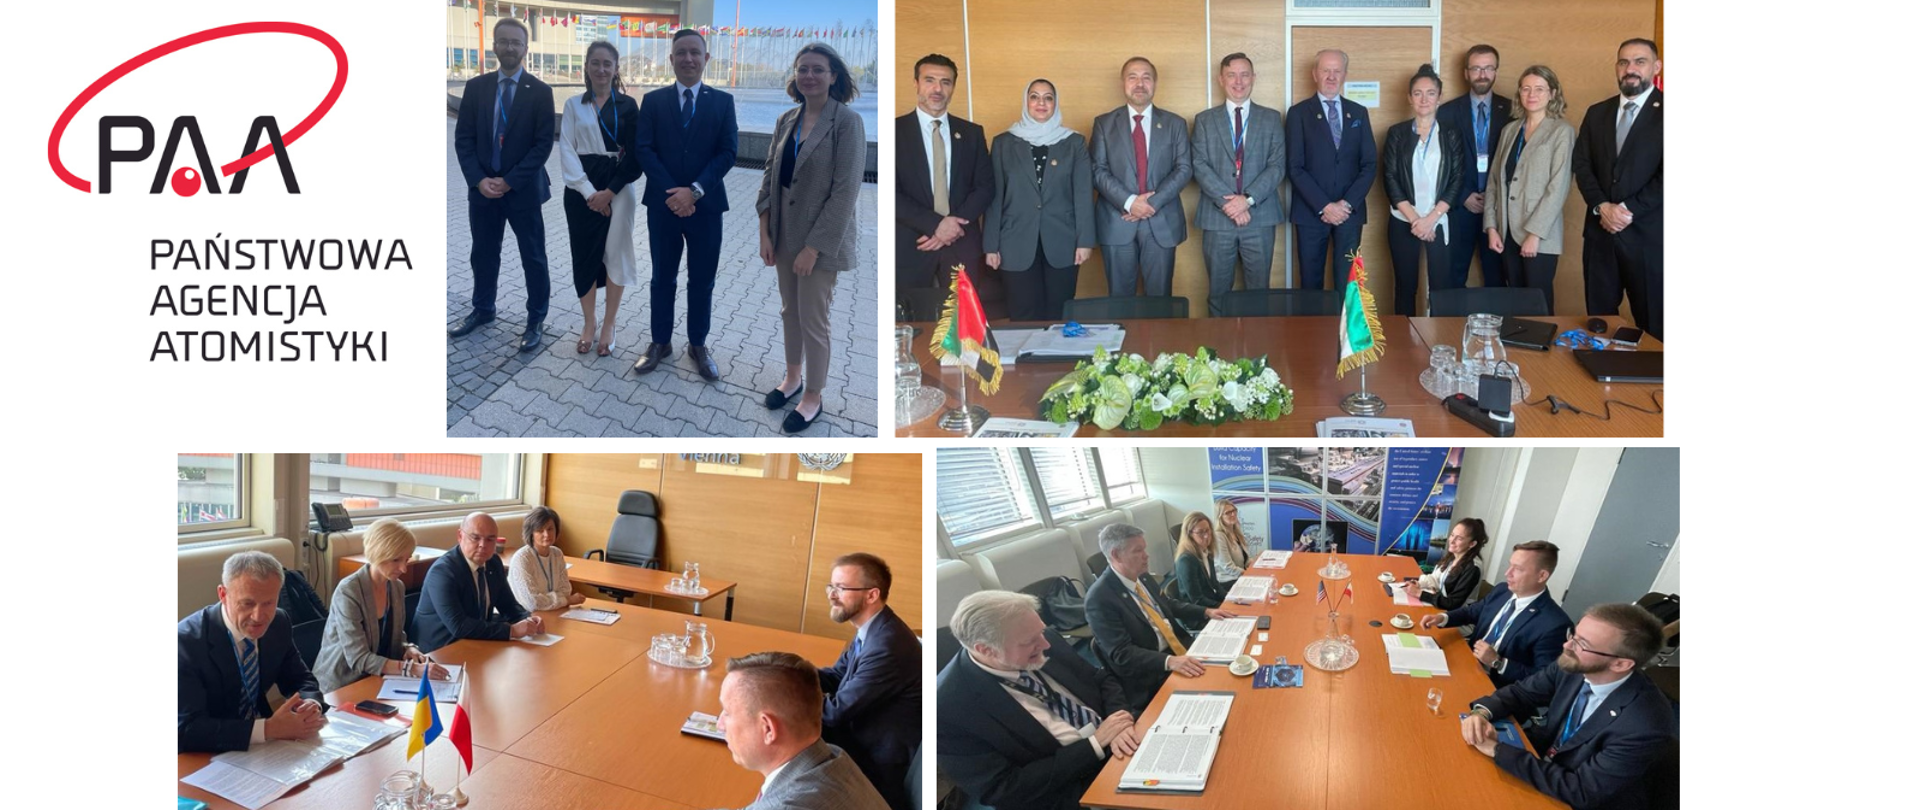 Collage of photos from meetings of the PAA delegation with foreign nuclear regulators during the 67th General Conference of the International Atomic Energy Agency